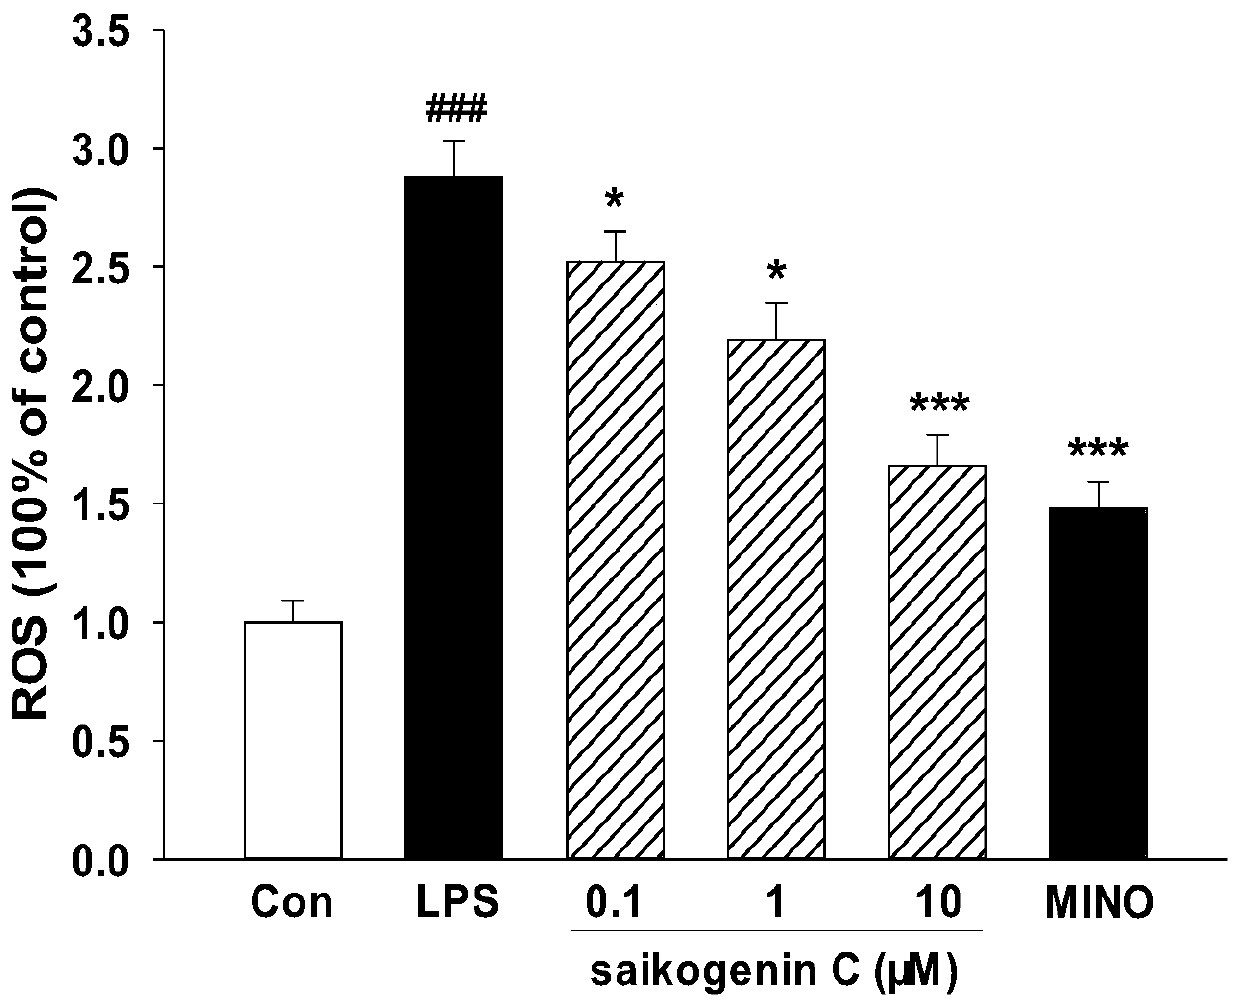 New application of saikosaponin C in inhibiting neuroinflammation